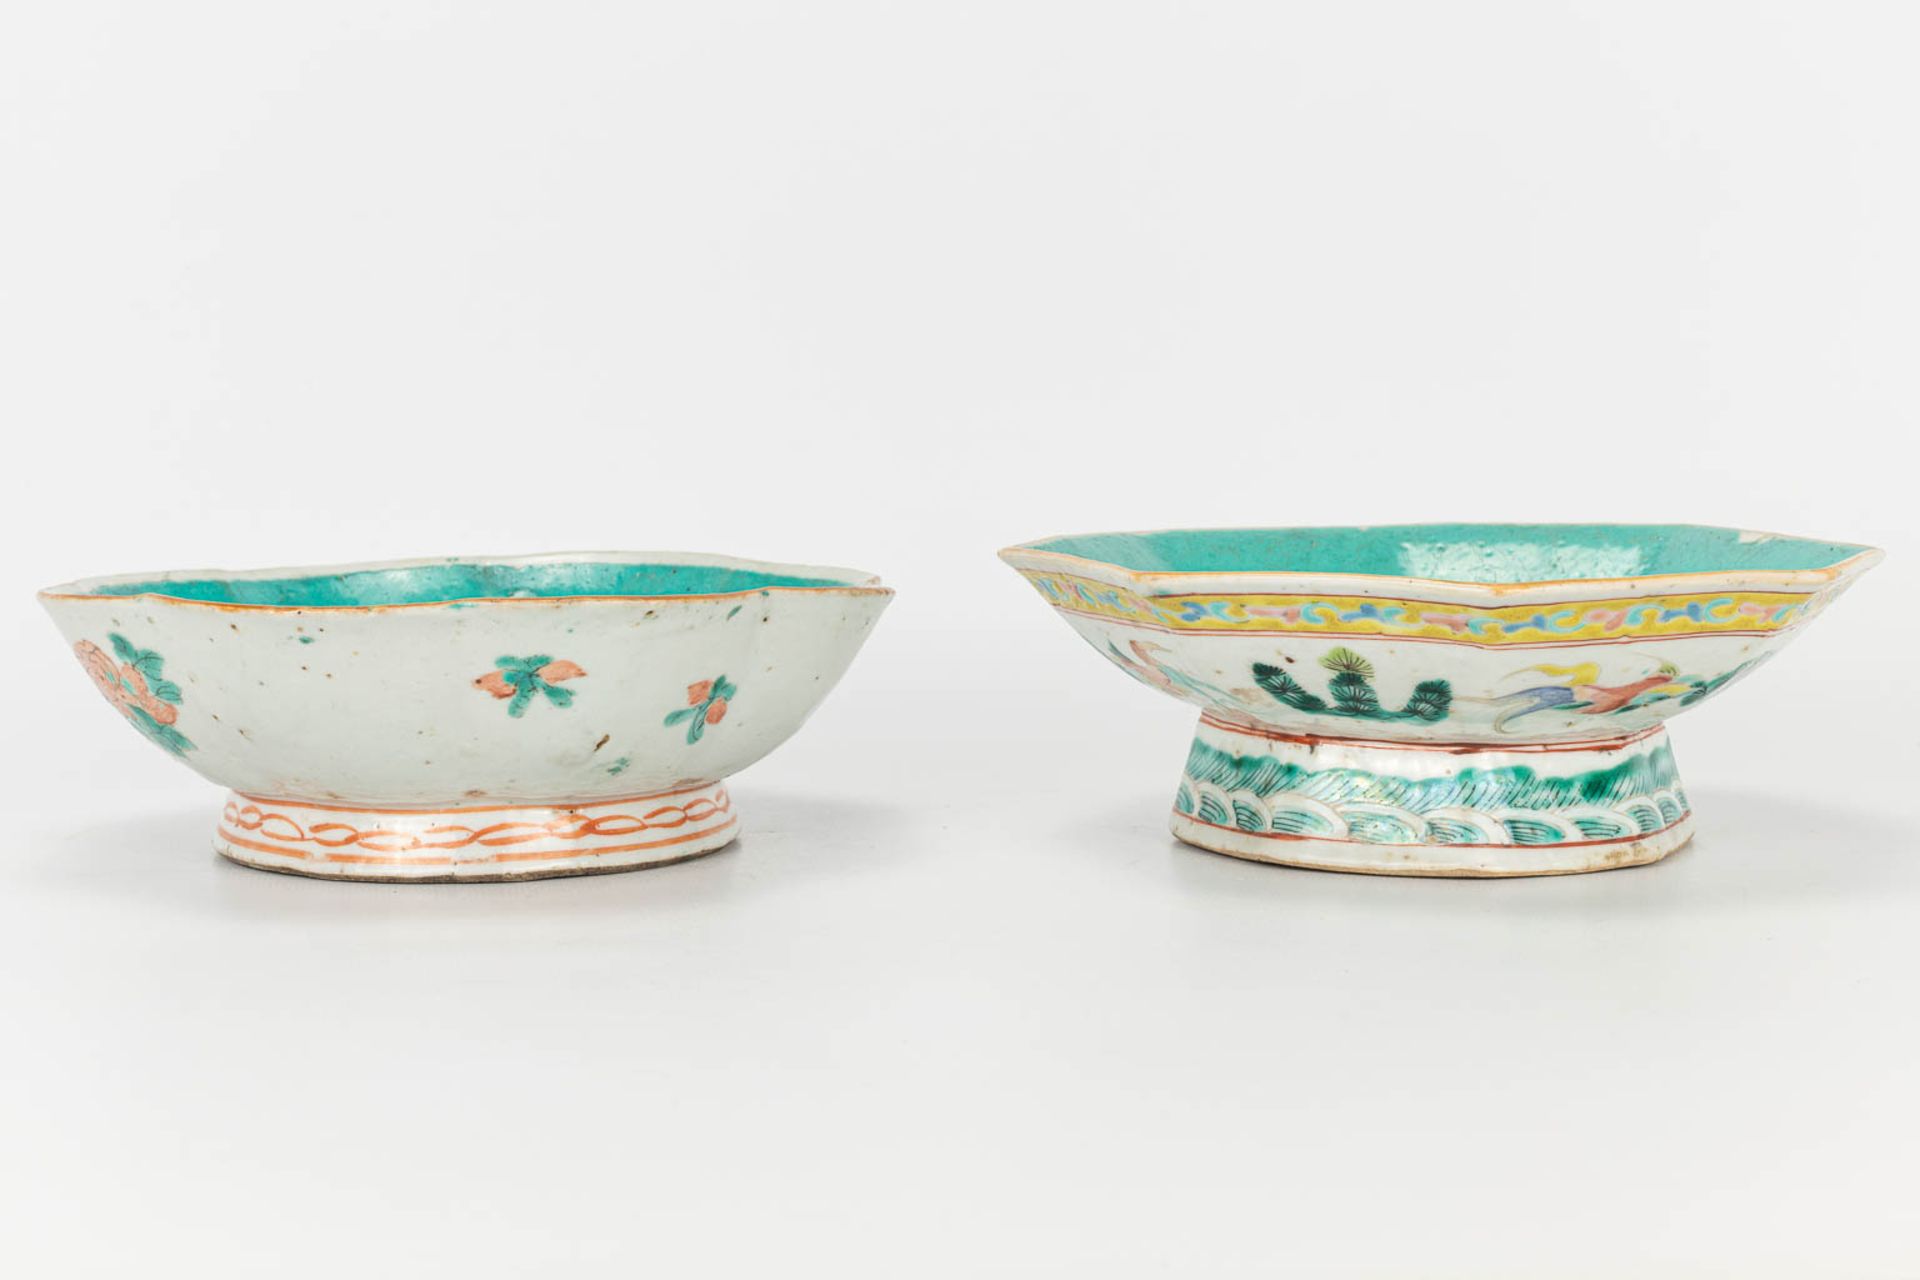 A set of 4 items made of Chinese porcelain. 2 small bowls and 2 ginger jars without lids. - Image 2 of 23